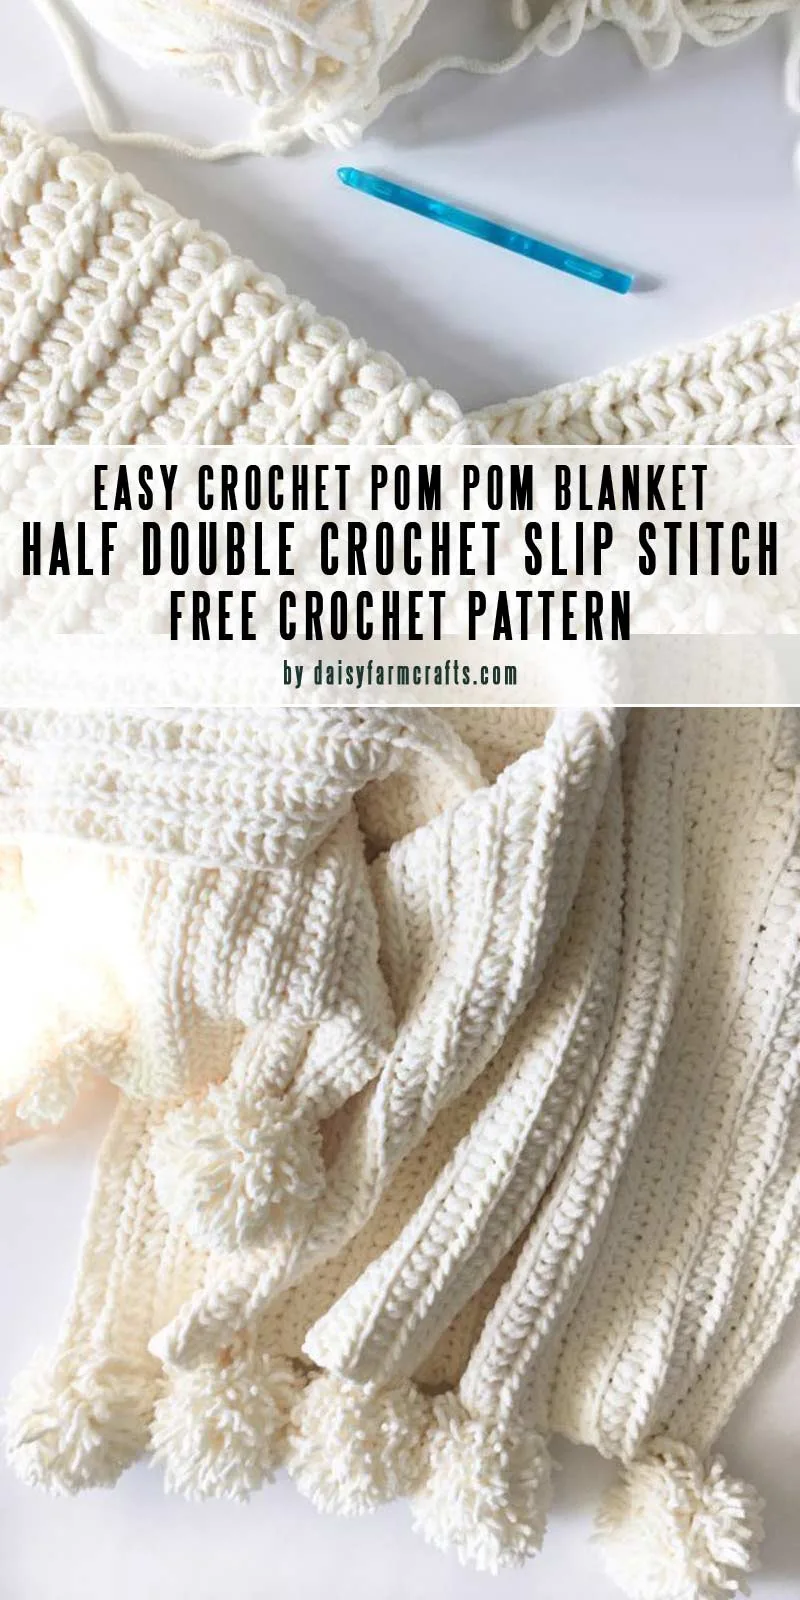 10 easy crochet baby blanket patterns (FREE) you can finish in a ...